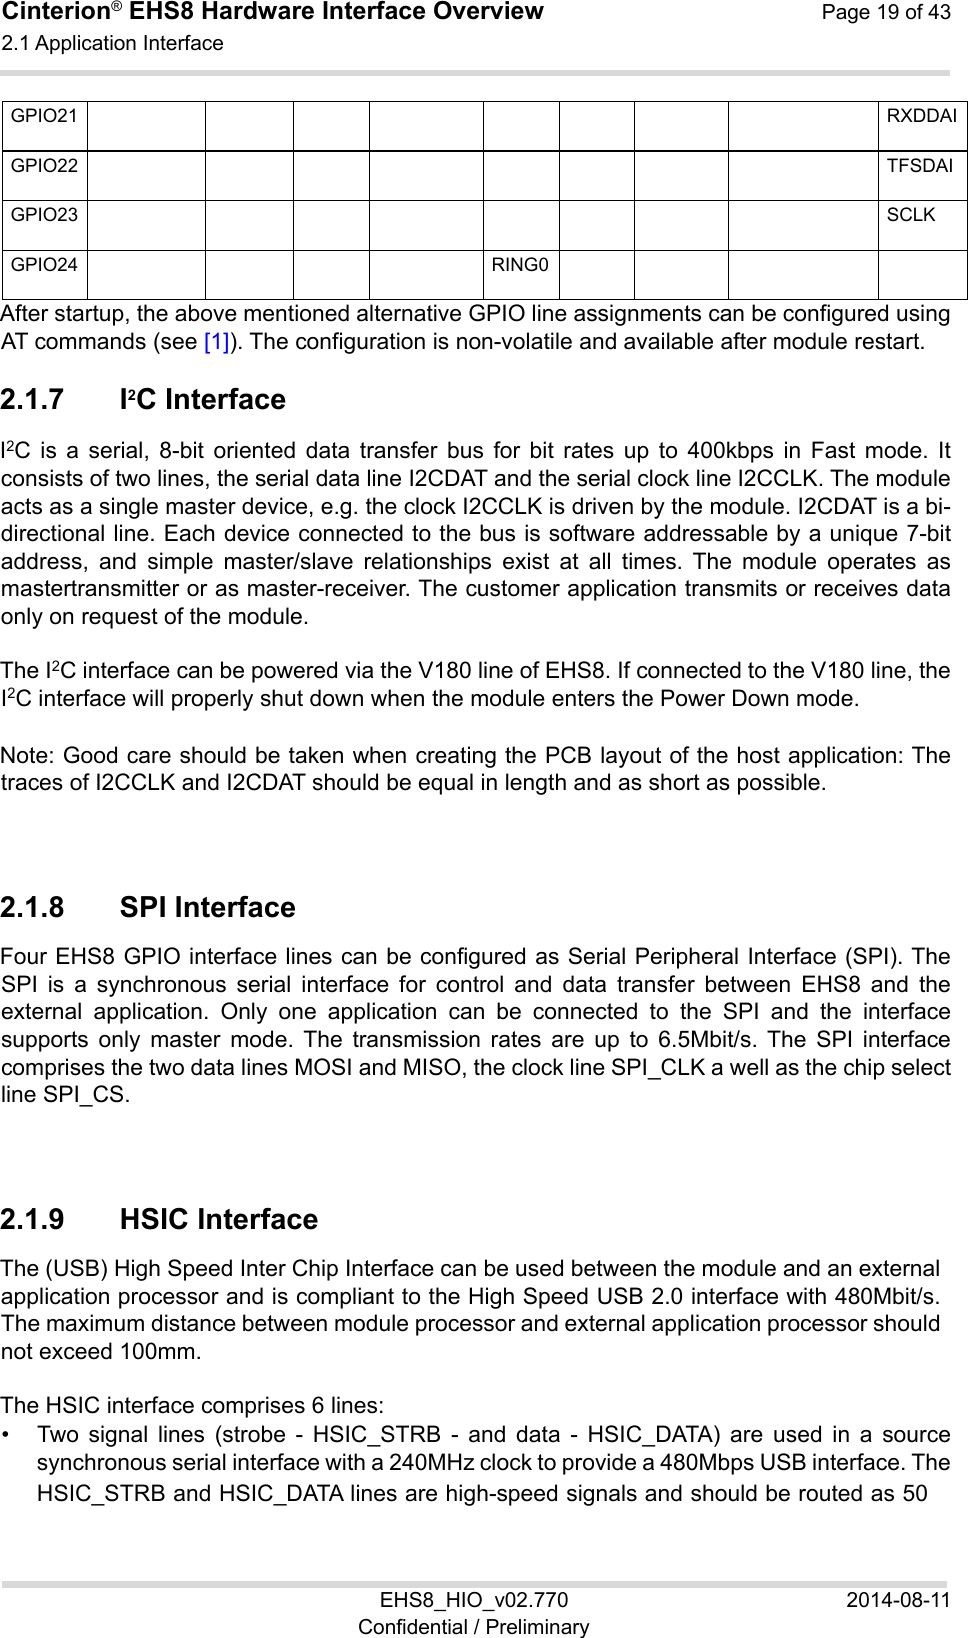 Cinterion® EHS8 Hardware Interface Overview  Page 19 of 43 2.1 Application Interface 24 EHS8_HIO_v02.770  2014-08-11 Confidential / Preliminary GPIO21          RXDDAIGPIO22          TFSDAIGPIO23          SCLKGPIO24     RING0       After startup, the above mentioned alternative GPIO line assignments can be configured using AT commands (see [1]). The configuration is non-volatile and available after module restart. 2.1.7  I2C Interface I2C  is  a  serial,  8-bit  oriented  data  transfer  bus  for  bit  rates  up  to  400kbps  in  Fast  mode.  It consists of two lines, the serial data line I2CDAT and the serial clock line I2CCLK. The module acts as a single master device, e.g. the clock I2CCLK is driven by the module. I2CDAT is a bi-directional line. Each device connected to the bus is software addressable by a unique 7-bit address,  and  simple  master/slave  relationships  exist  at  all  times.  The  module  operates  as mastertransmitter or as master-receiver. The customer application transmits or receives data only on request of the module. The I2C interface can be powered via the V180 line of EHS8. If connected to the V180 line, the I2C interface will properly shut down when the module enters the Power Down mode. Note: Good care should be taken when creating the PCB layout of the host application: The traces of I2CCLK and I2CDAT should be equal in length and as short as possible. 2.1.8  SPI Interface Four EHS8 GPIO interface lines can be configured as Serial Peripheral Interface (SPI). The SPI  is  a  synchronous  serial  interface  for  control  and  data  transfer  between  EHS8  and  the external  application.  Only  one  application  can  be  connected  to  the  SPI  and  the  interface supports  only  master  mode. The  transmission  rates  are  up  to  6.5Mbit/s. The  SPI  interface comprises the two data lines MOSI and MISO, the clock line SPI_CLK a well as the chip select line SPI_CS. 2.1.9  HSIC Interface The (USB) High Speed Inter Chip Interface can be used between the module and an external application processor and is compliant to the High Speed USB 2.0 interface with 480Mbit/s. The maximum distance between module processor and external application processor should not exceed 100mm. The HSIC interface comprises 6 lines: •  Two  signal  lines  (strobe  -  HSIC_STRB  -  and  data  -  HSIC_DATA)  are  used  in  a  source synchronous serial interface with a 240MHz clock to provide a 480Mbps USB interface. The HSIC_STRB and HSIC_DATA lines are high-speed signals and should be routed as 50　 